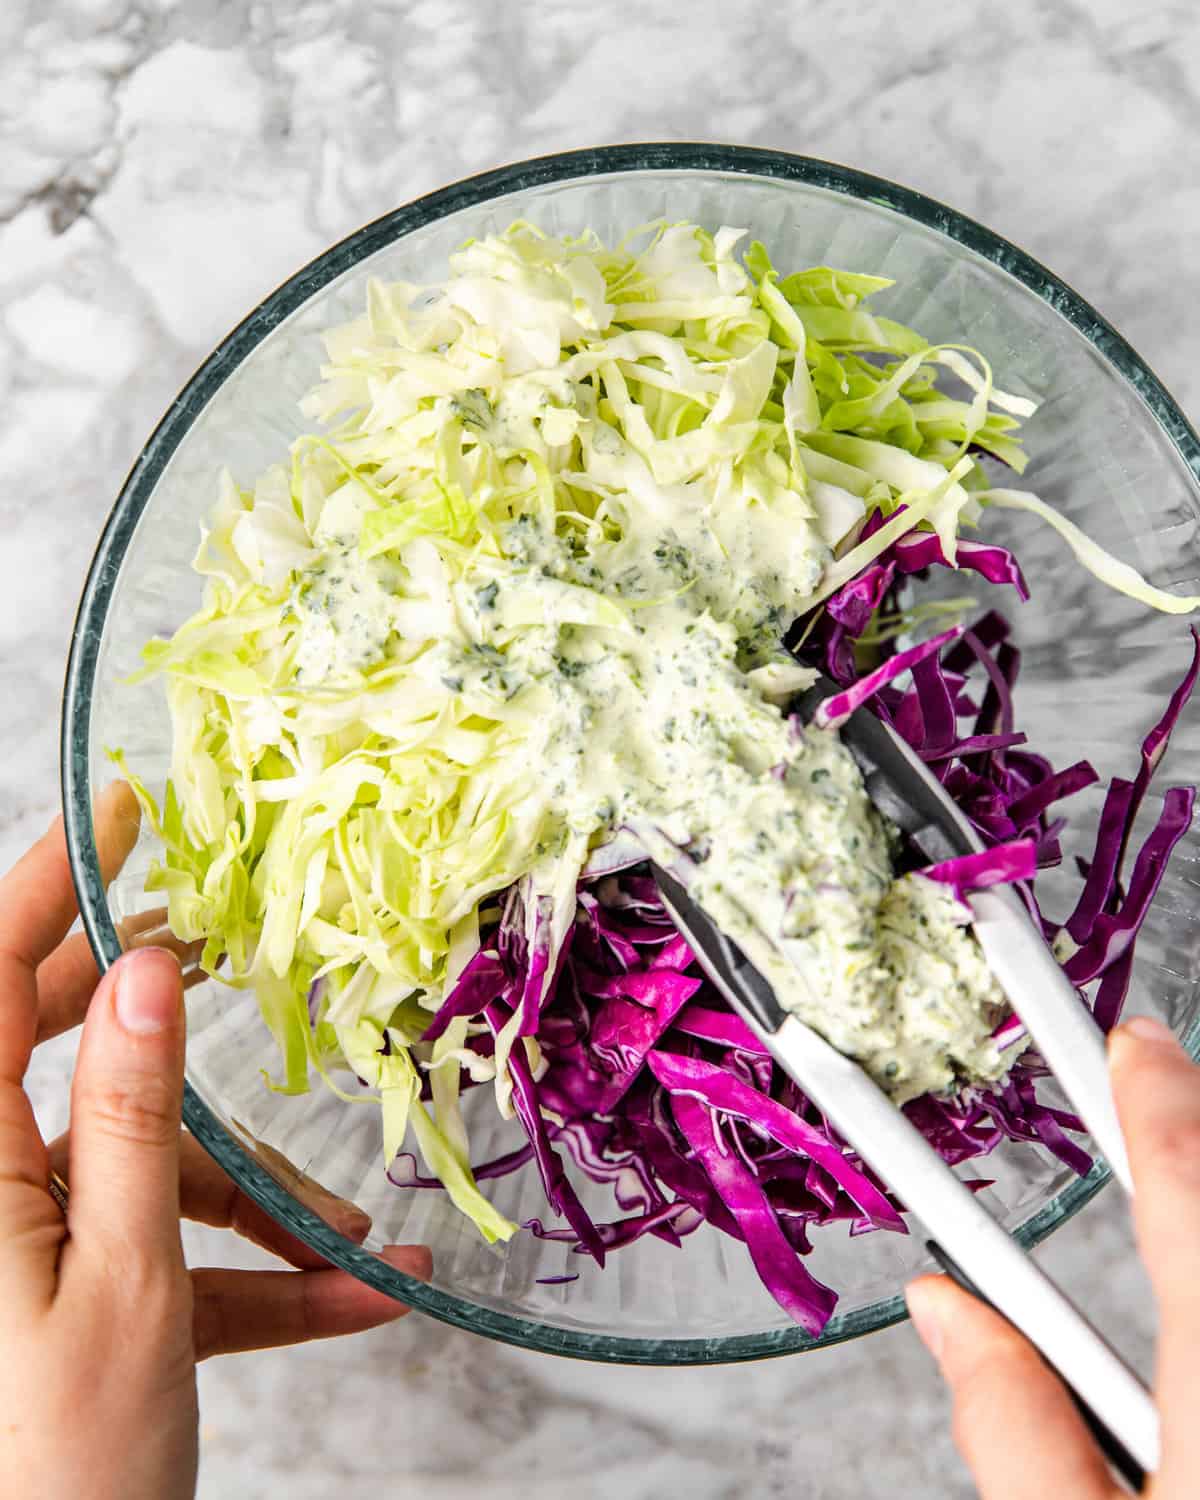 tossing shredded cabbage with cilantro lime sauce.